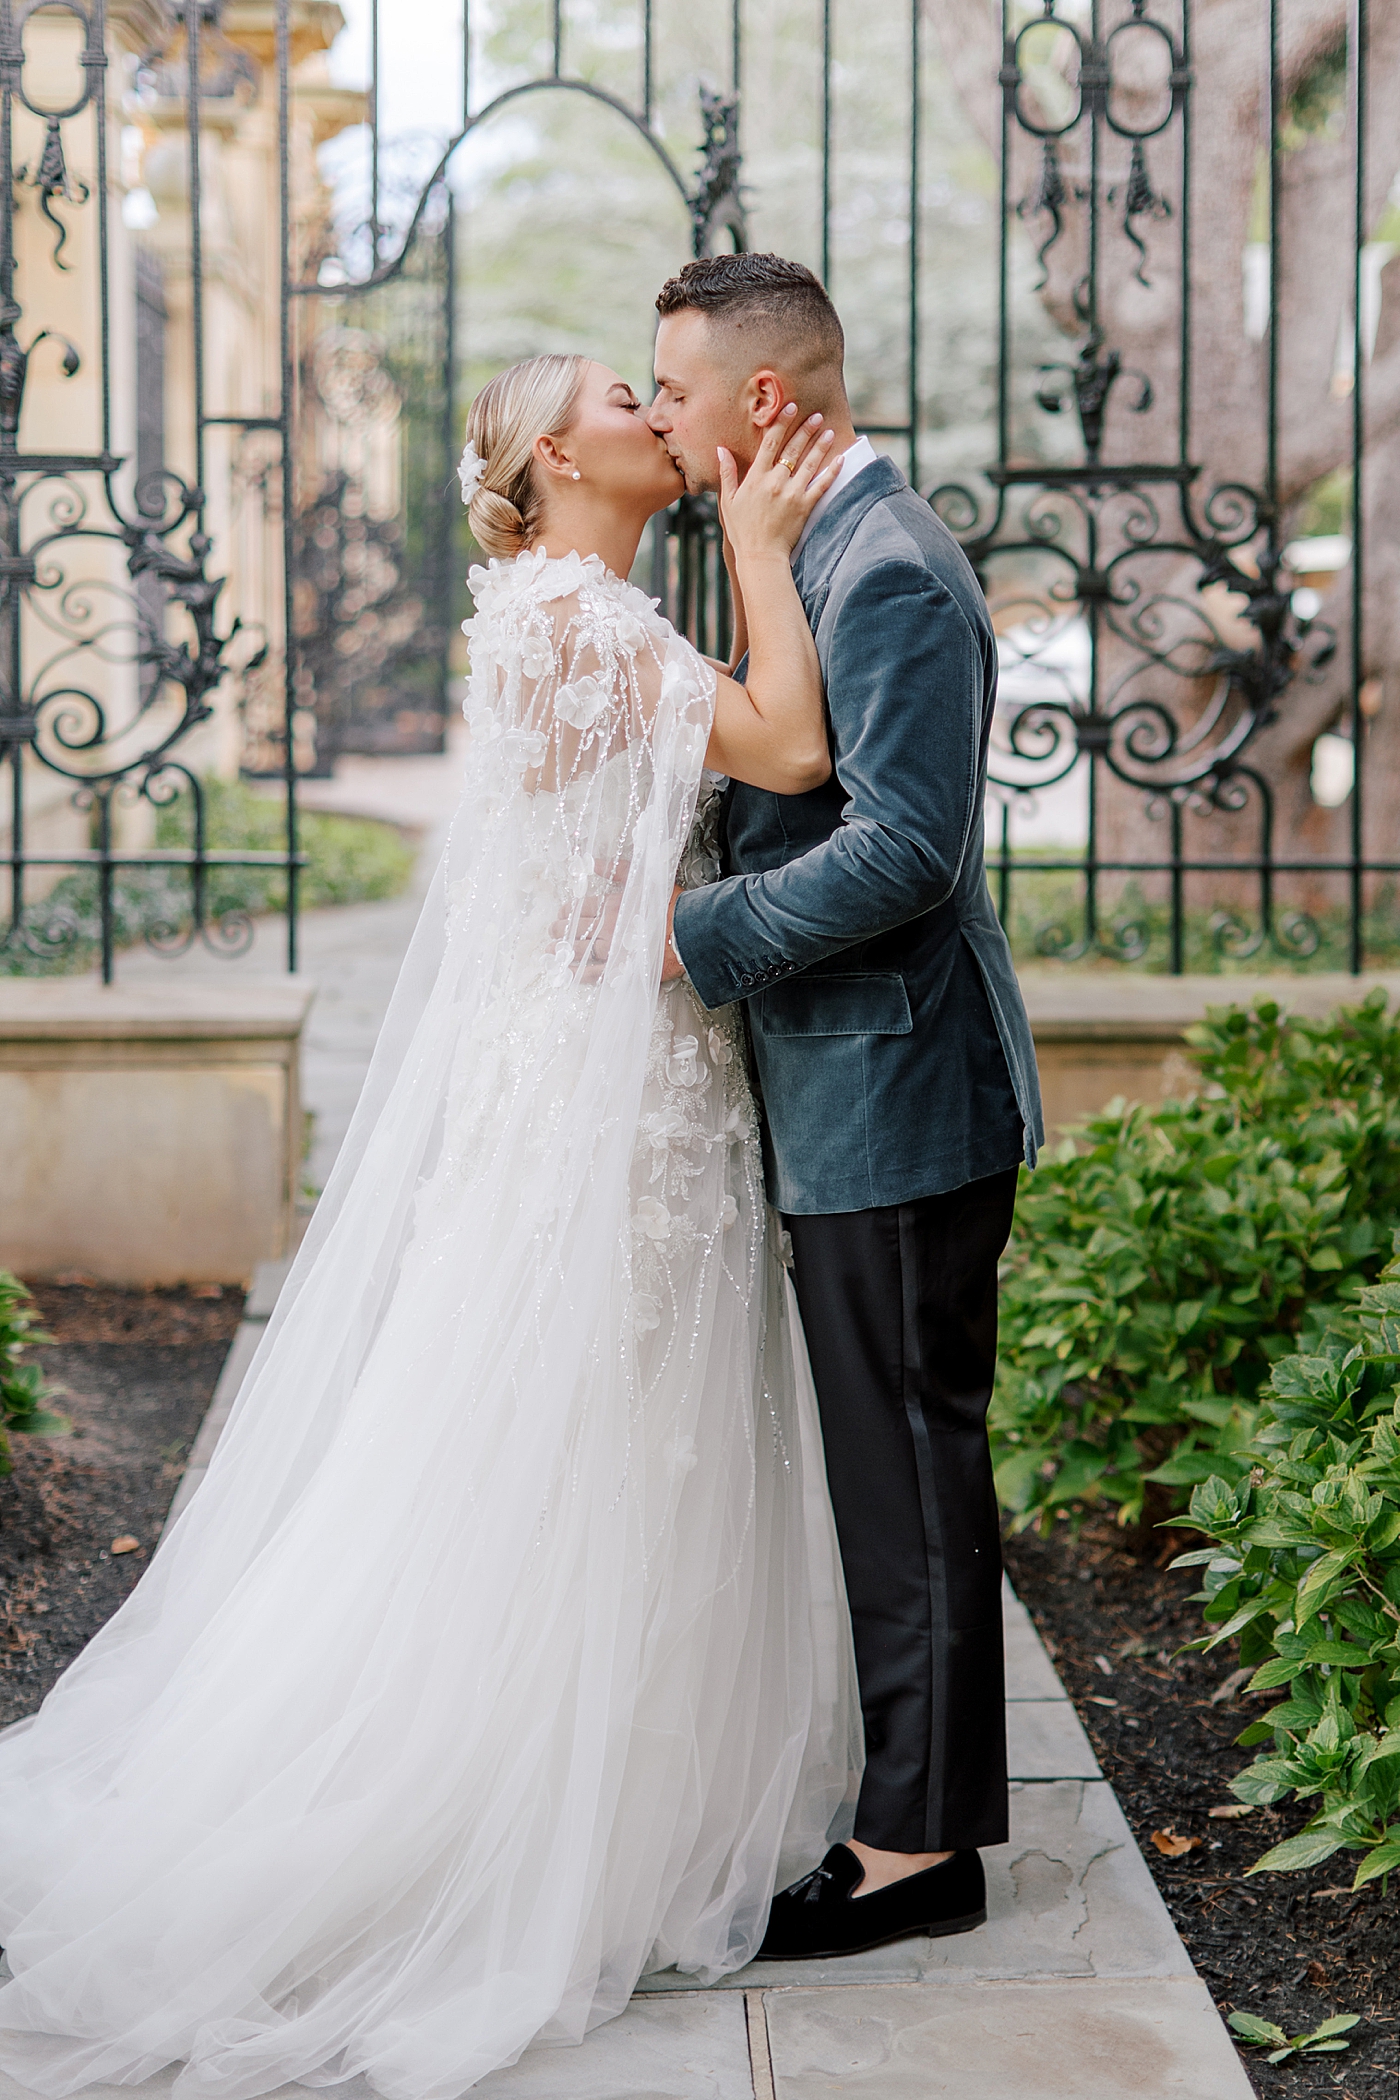 Bride and groom kissing in front of iron gate | Image by Hope Helmuth Photography